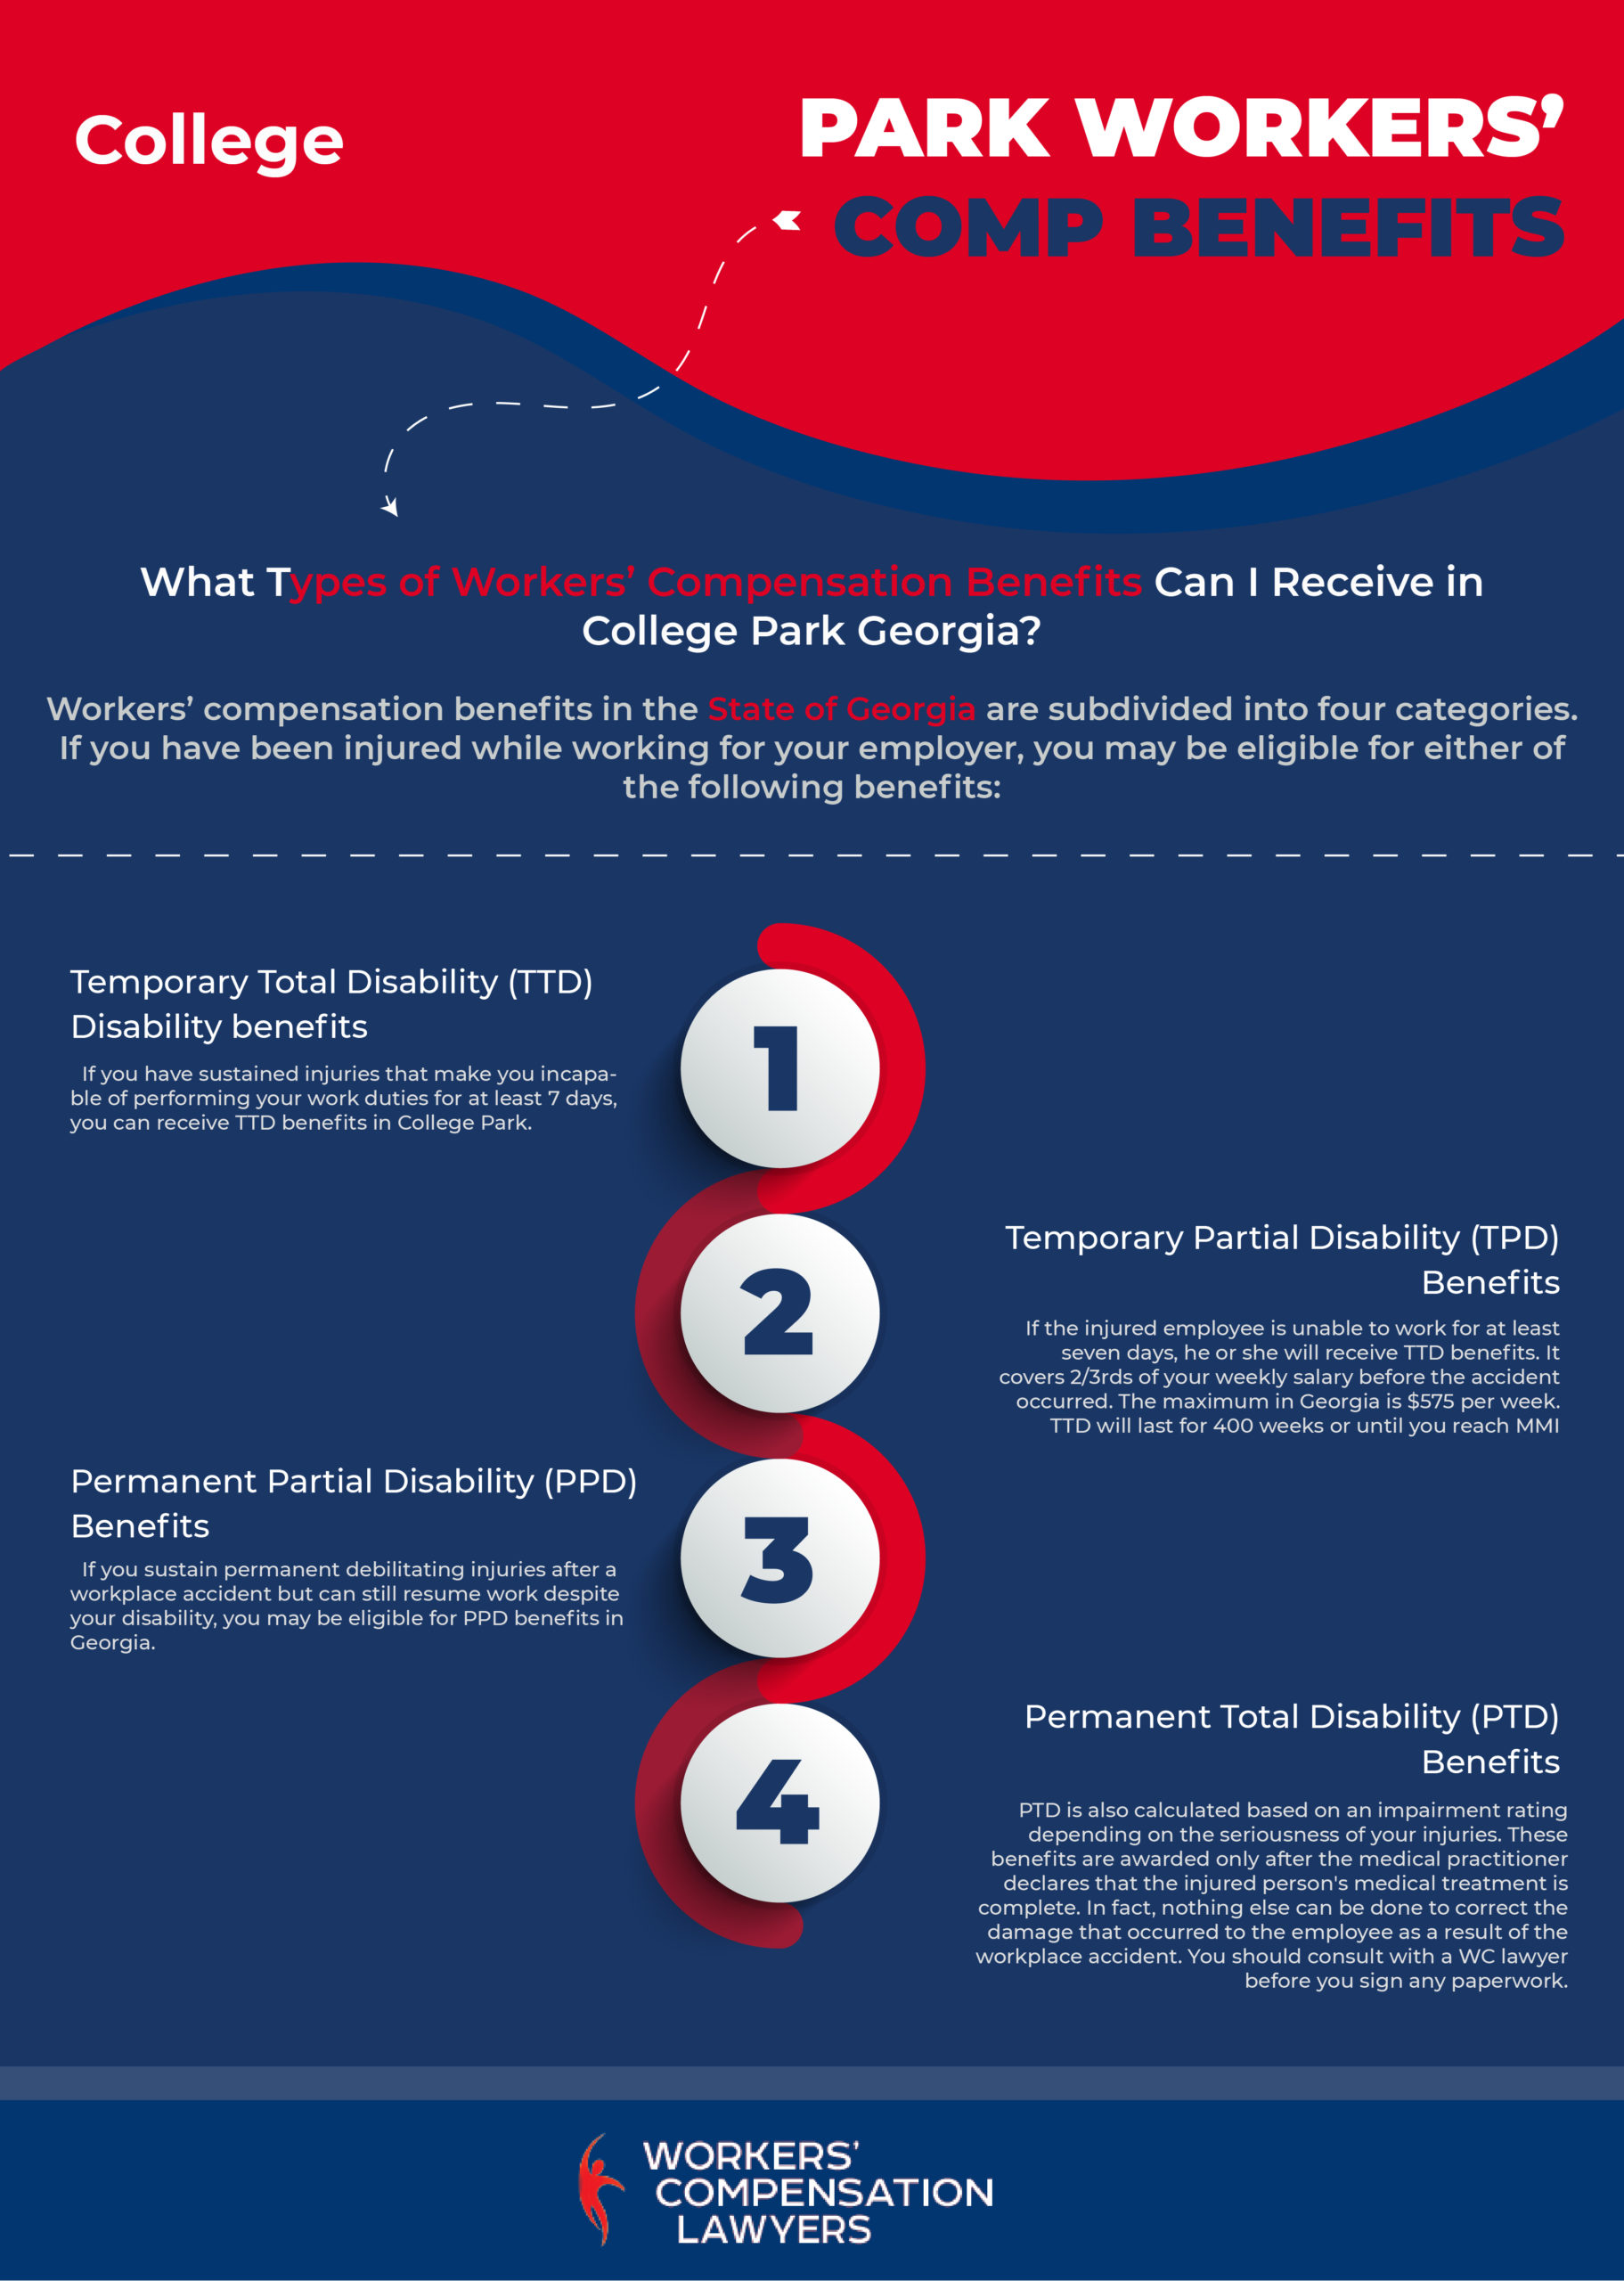 College Park Workers' Compensation Benefits Infographic